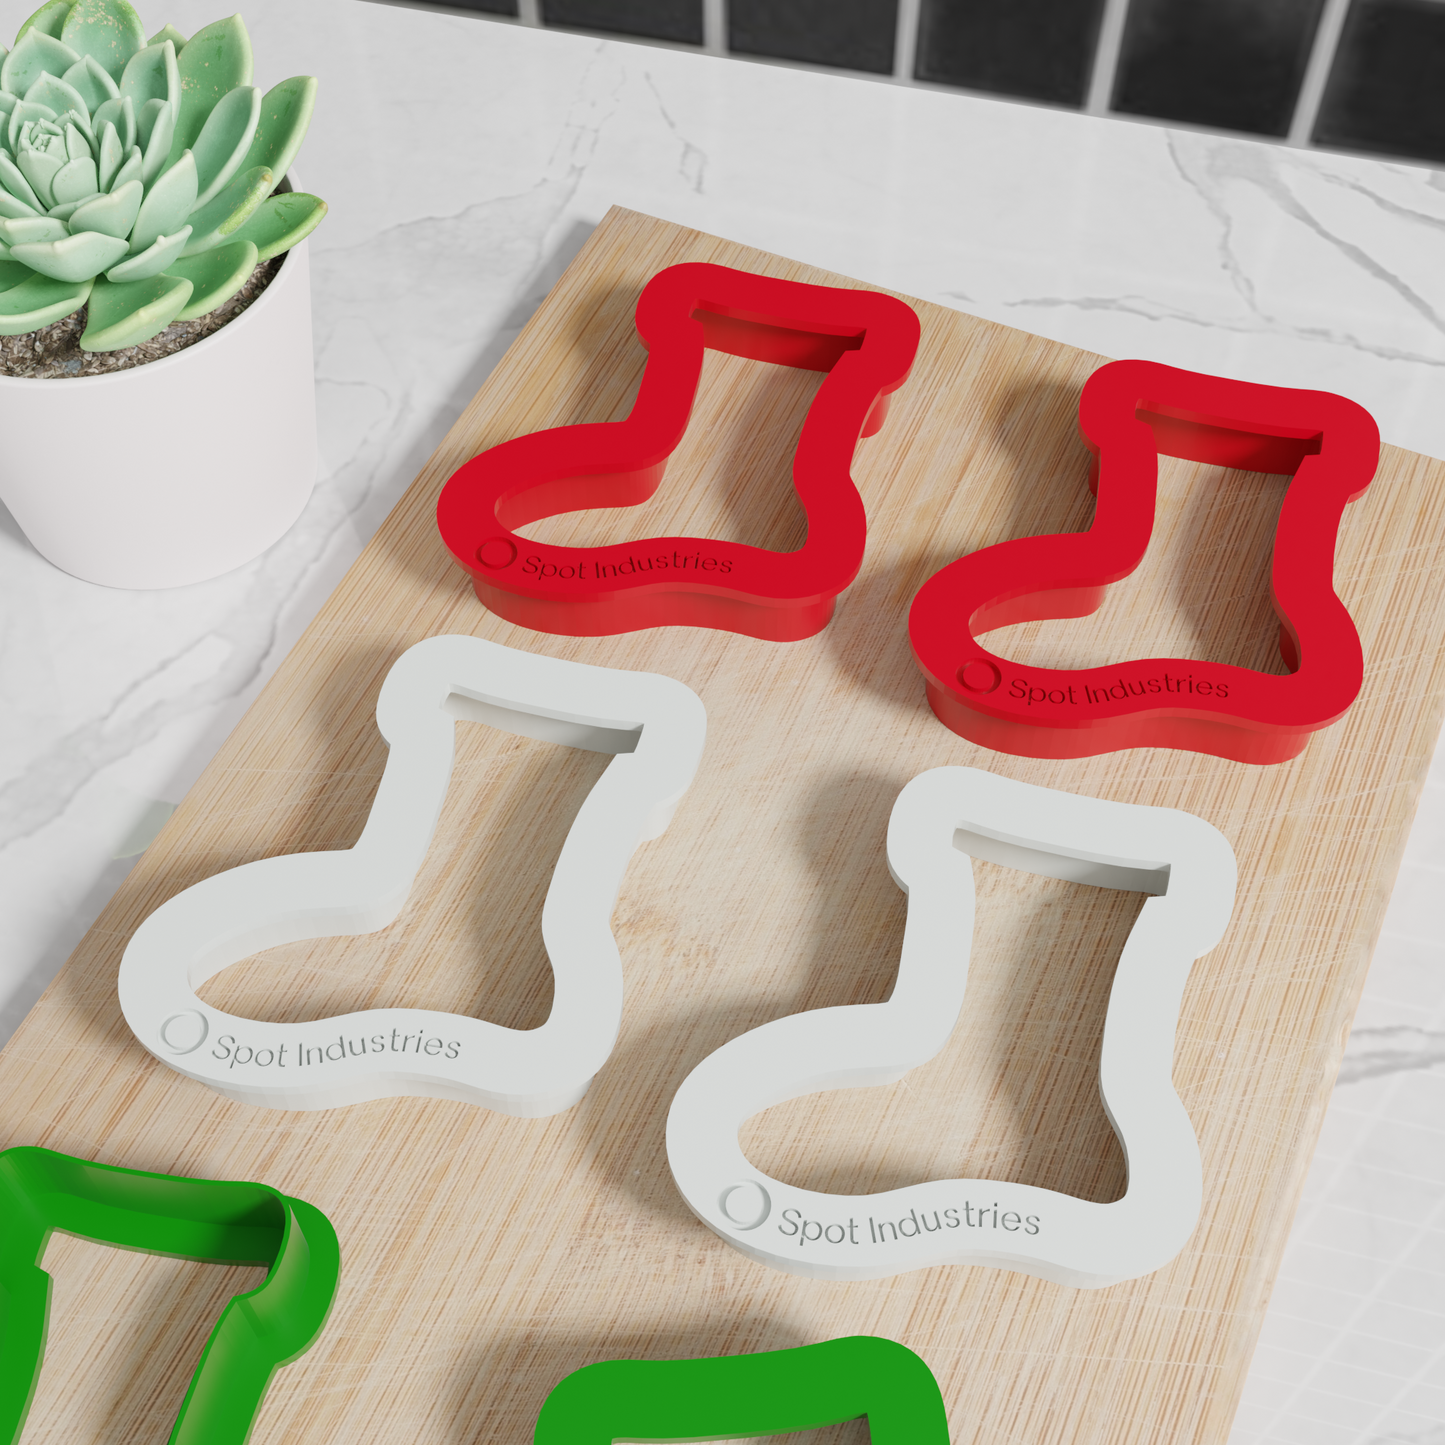 Easy Grip Stocking Cookie Cutter Set For Kids & Adults! Custom Sizes, Multiple Colors. Work As Clay Cutter And Fondant Cutter Too!